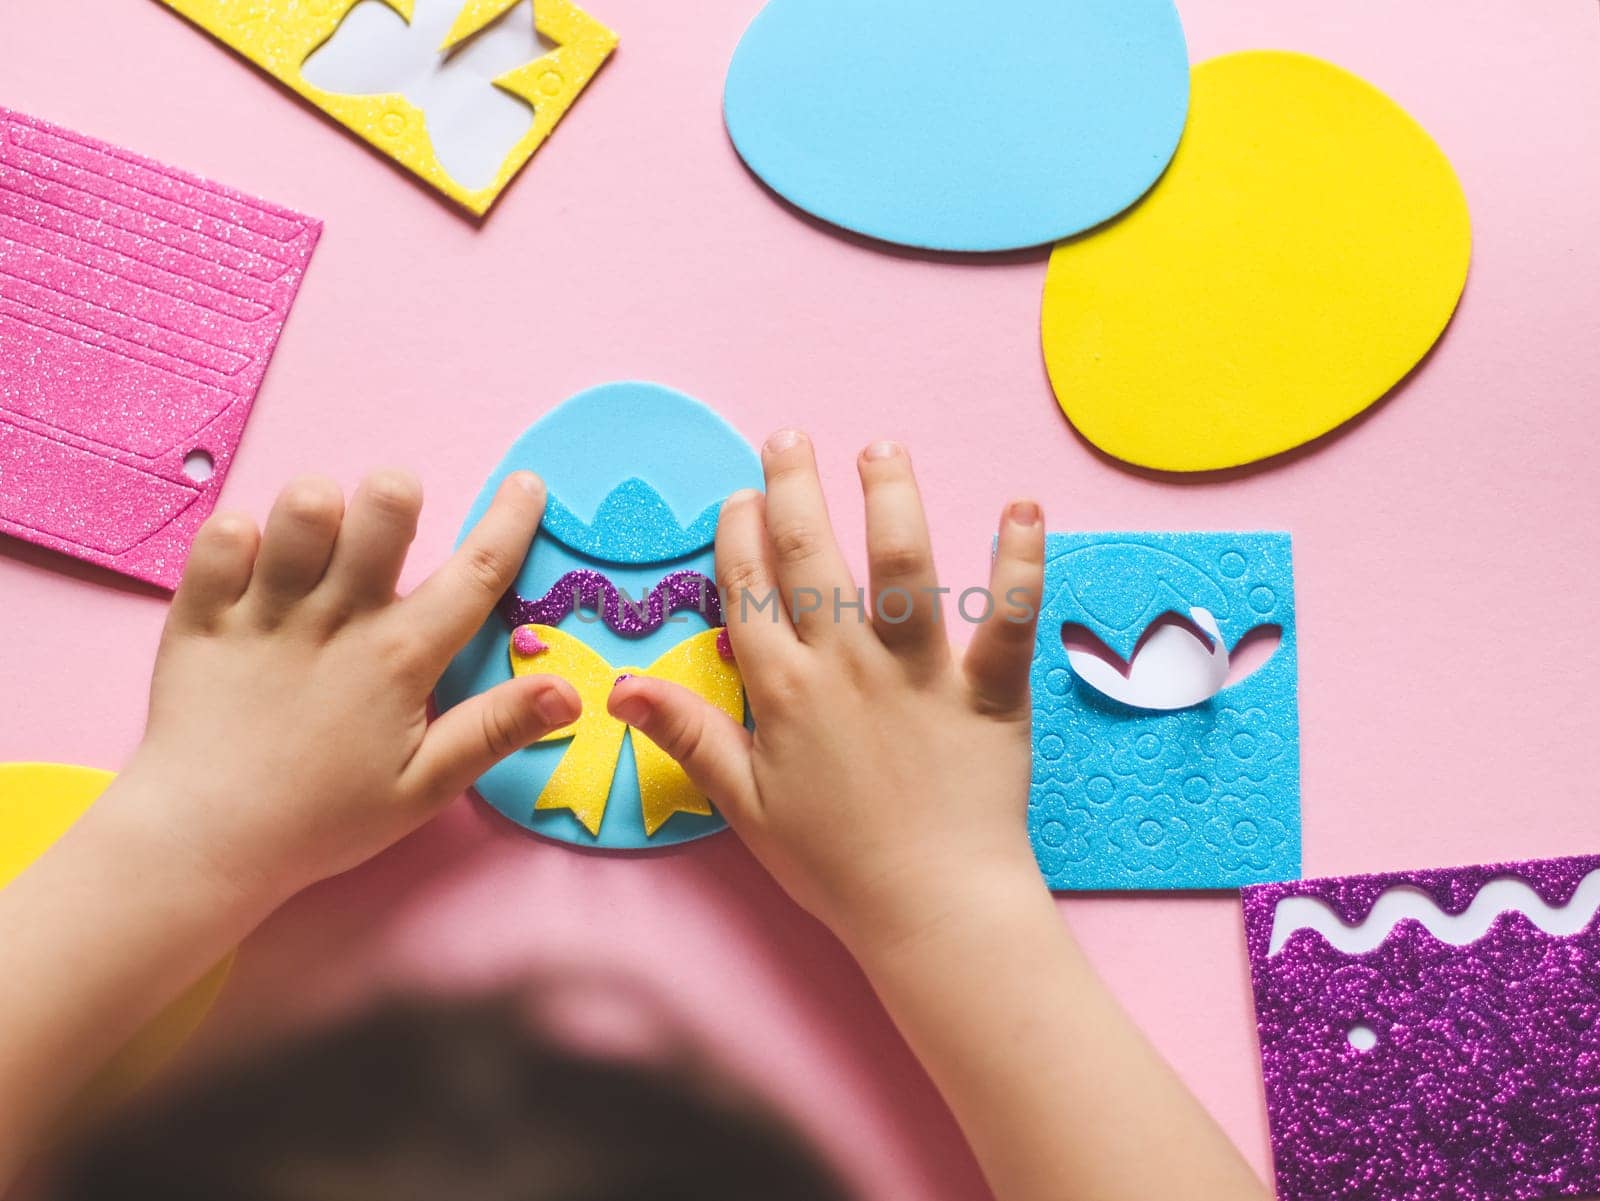 The hands of a little caucasian girl stick a hat sticker on a blue felt egg with a lilac zigzag, sitting at a children's table with a set of craft predas on a pink background, close-up top view. The concept of crafts, diy, needlework, at home, artisanal, child art, child creative, Easter preparation.